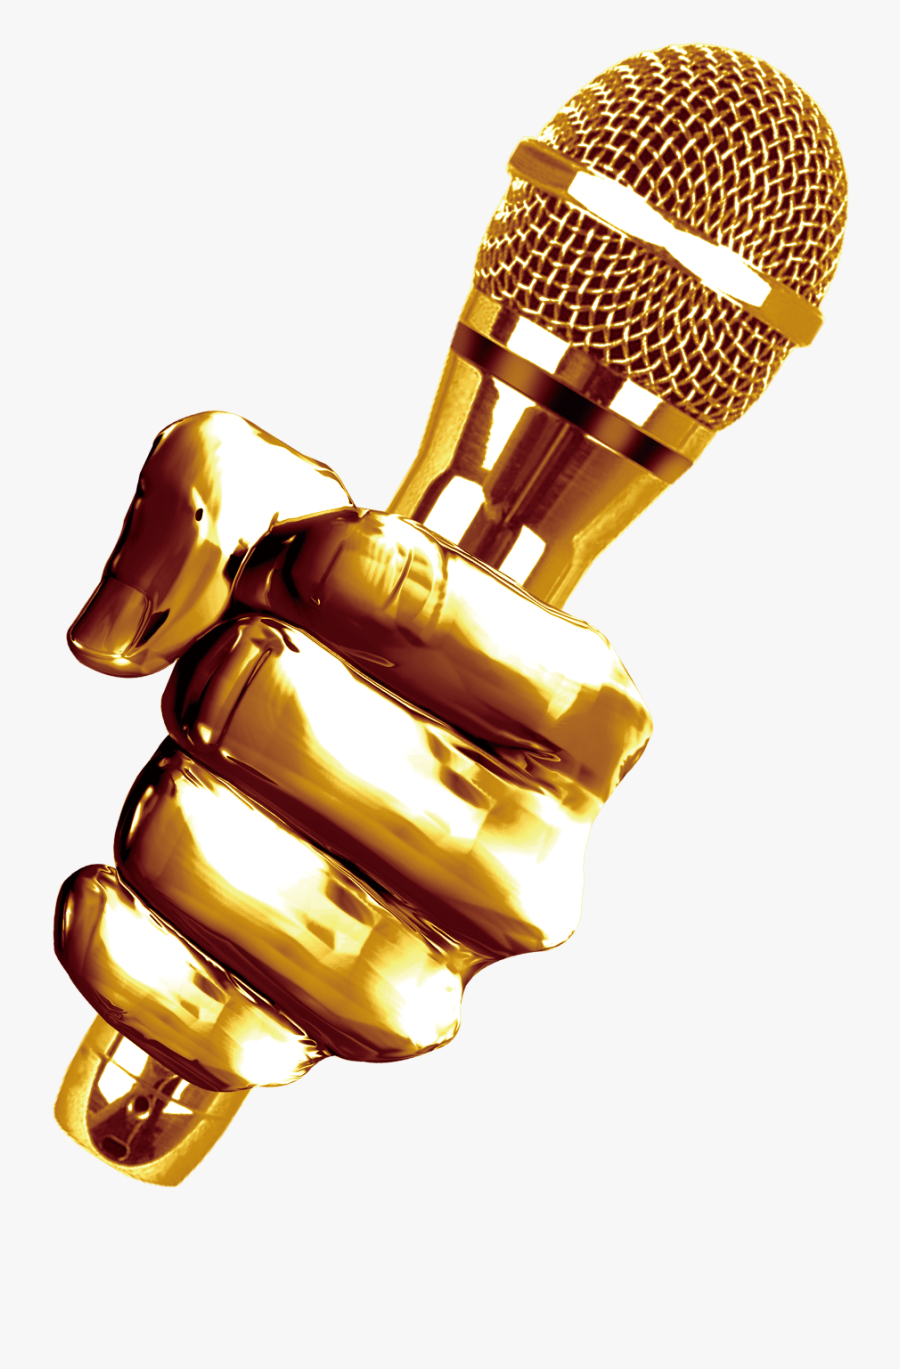 Nothing Comes Easy Unless You Believe - Golden Microphone Png, Transparent Clipart